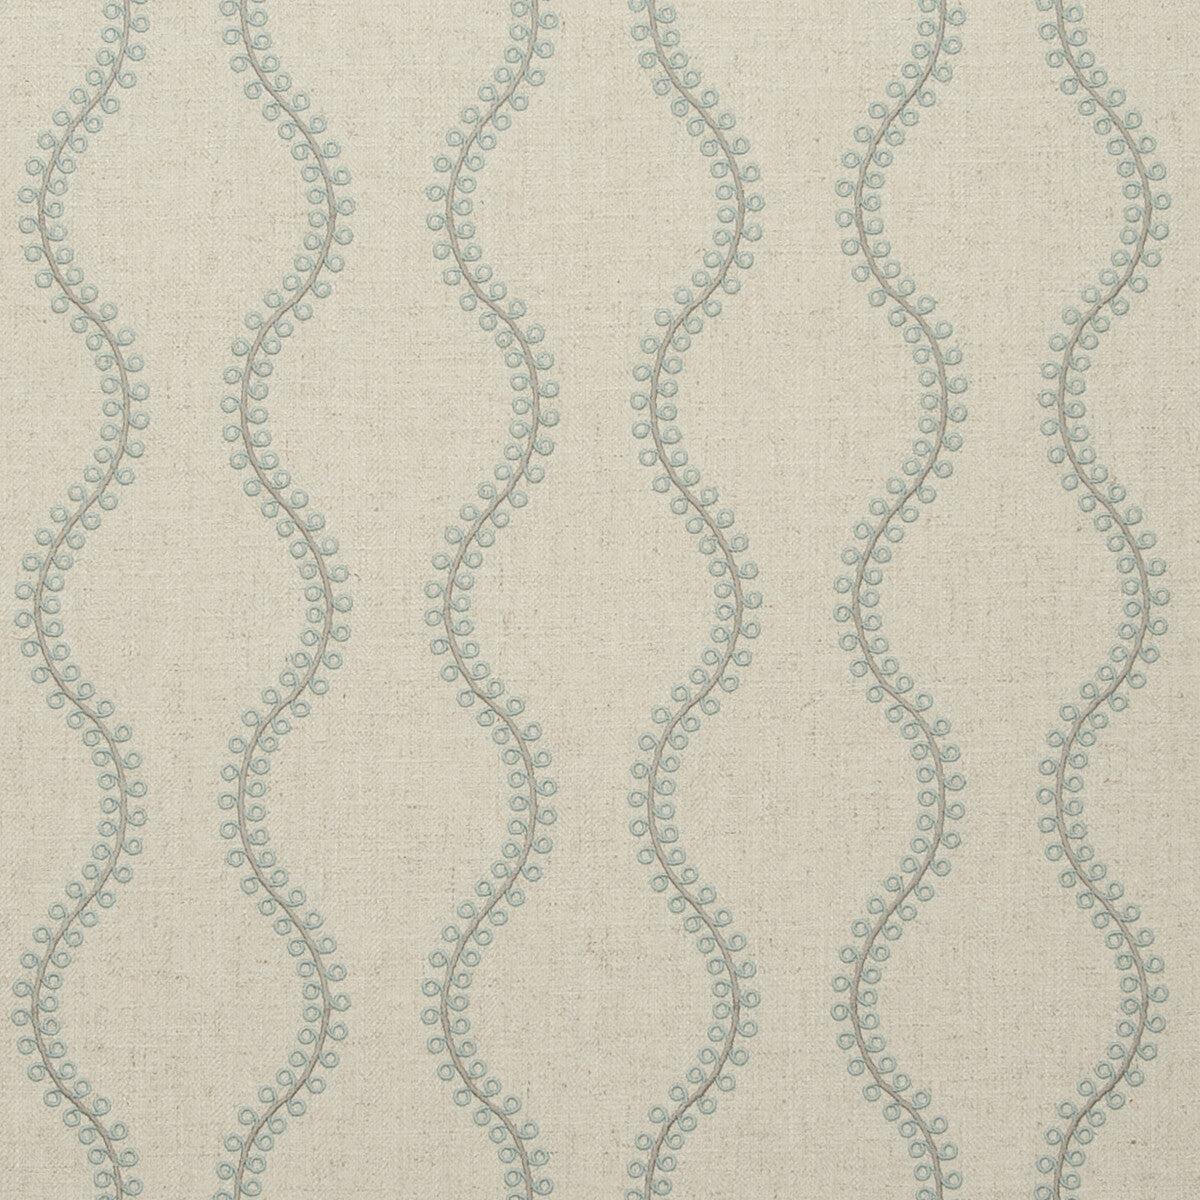 Woburn fabric in duckegg color - pattern F0741/04.CAC.0 - by Clarke And Clarke in the Clarke &amp; Clarke Manor House collection